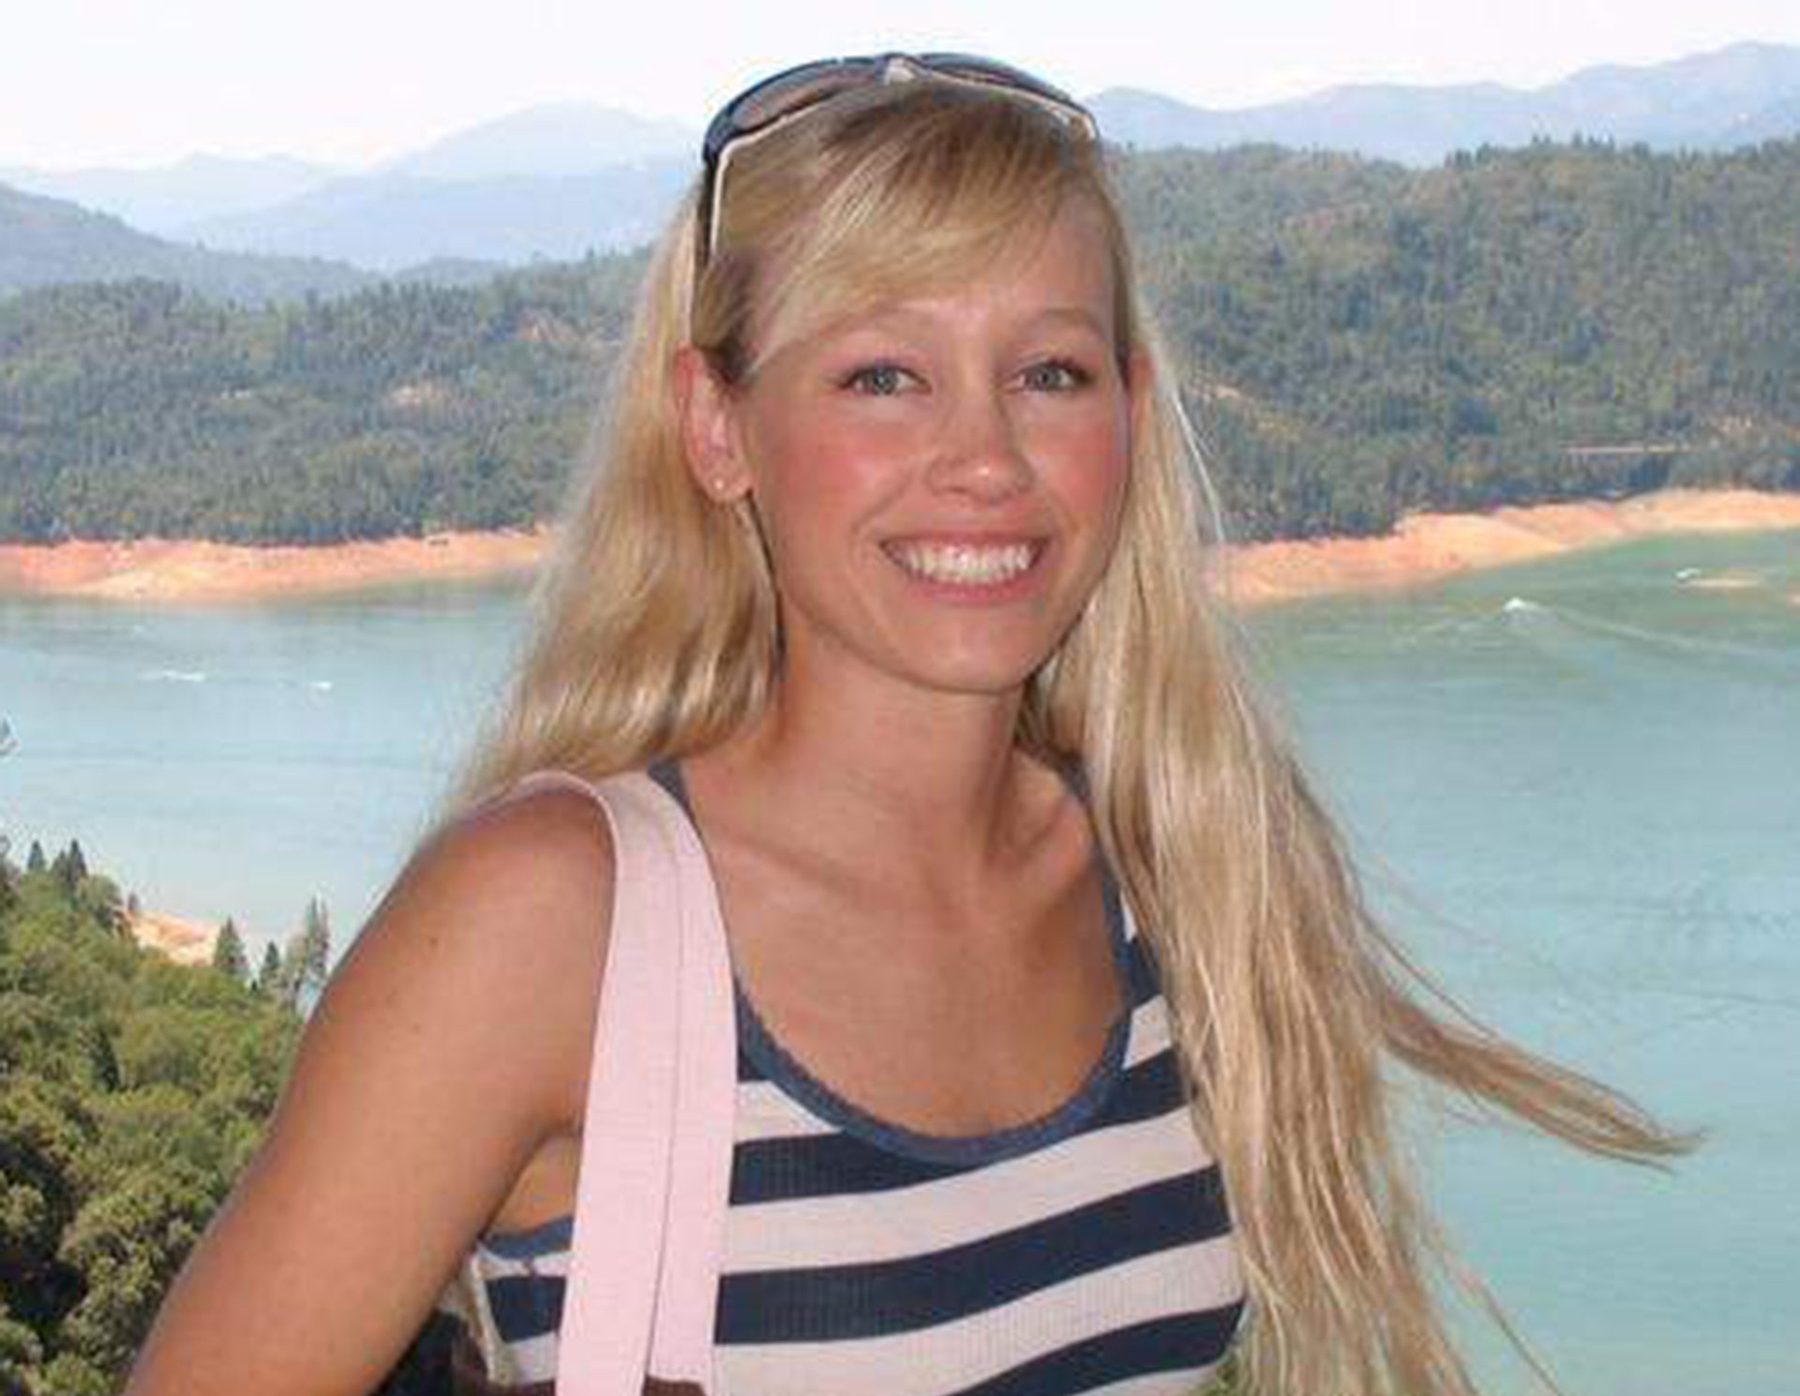 Sheri Papini starved, burned and head shaved: More details emerge about the abducted mum